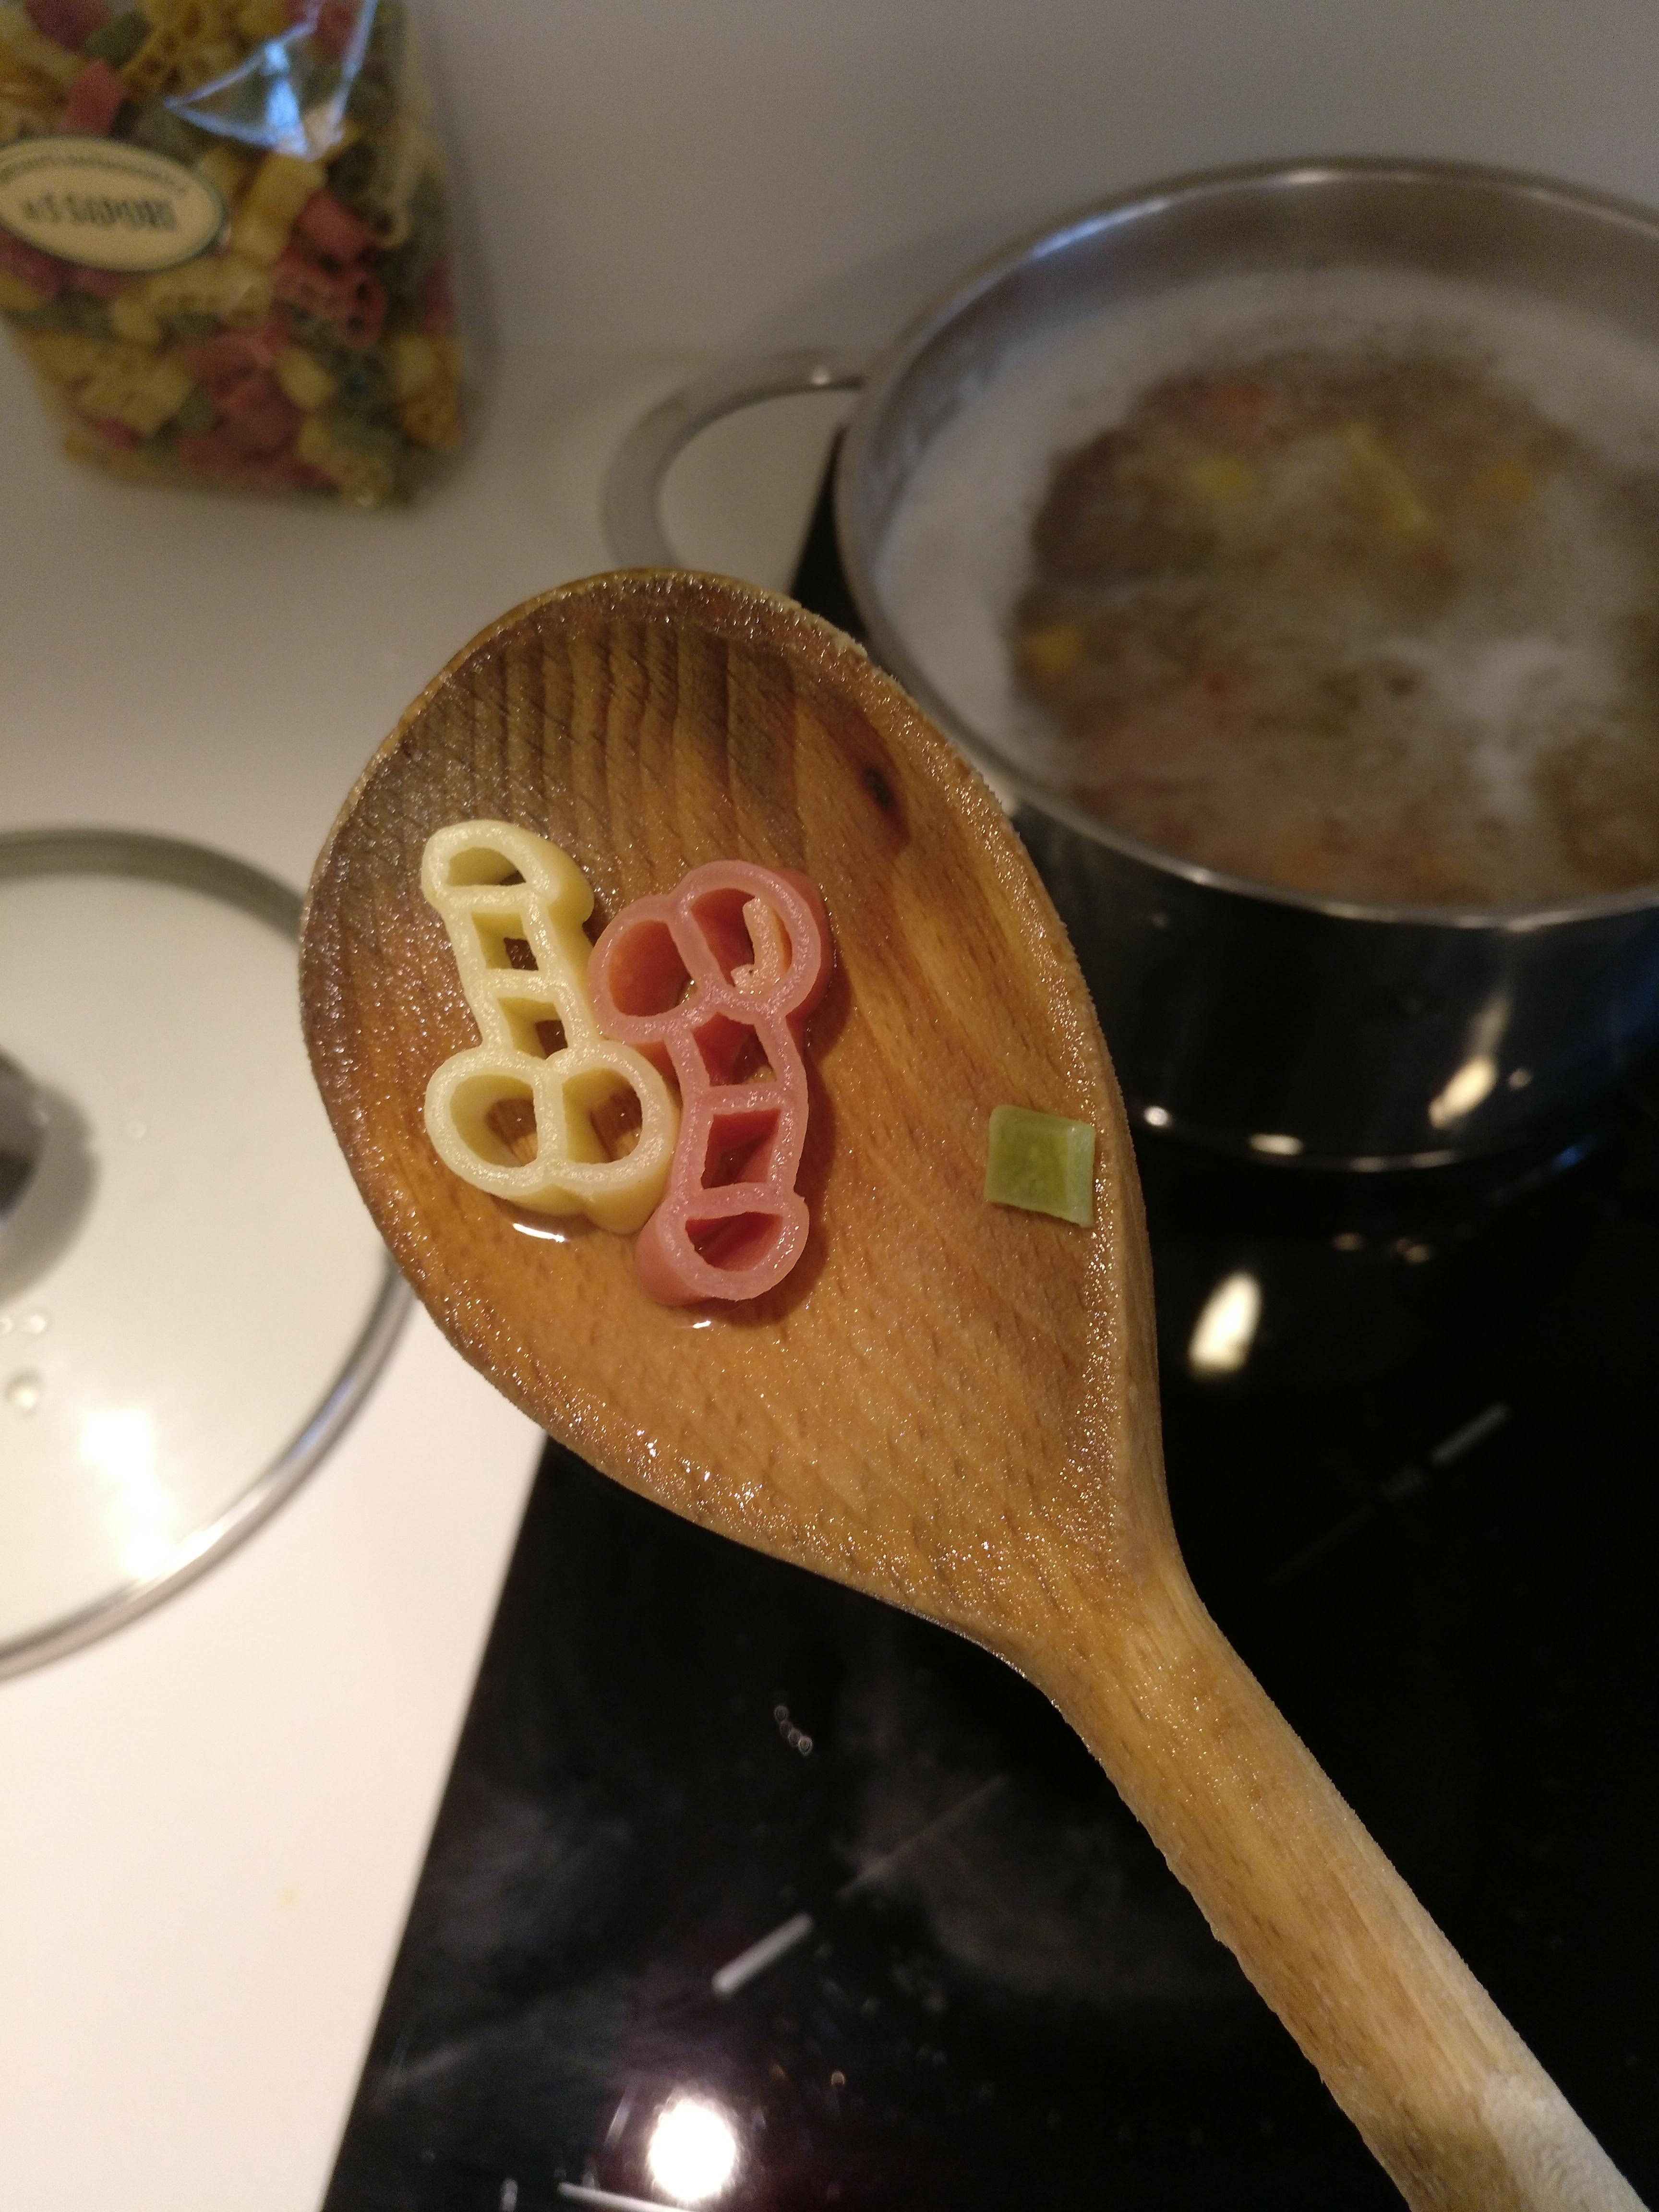 My in-laws went to Italy on holidays and brought pasta for everyone in a rush. They didn't pay much attention to the shape...